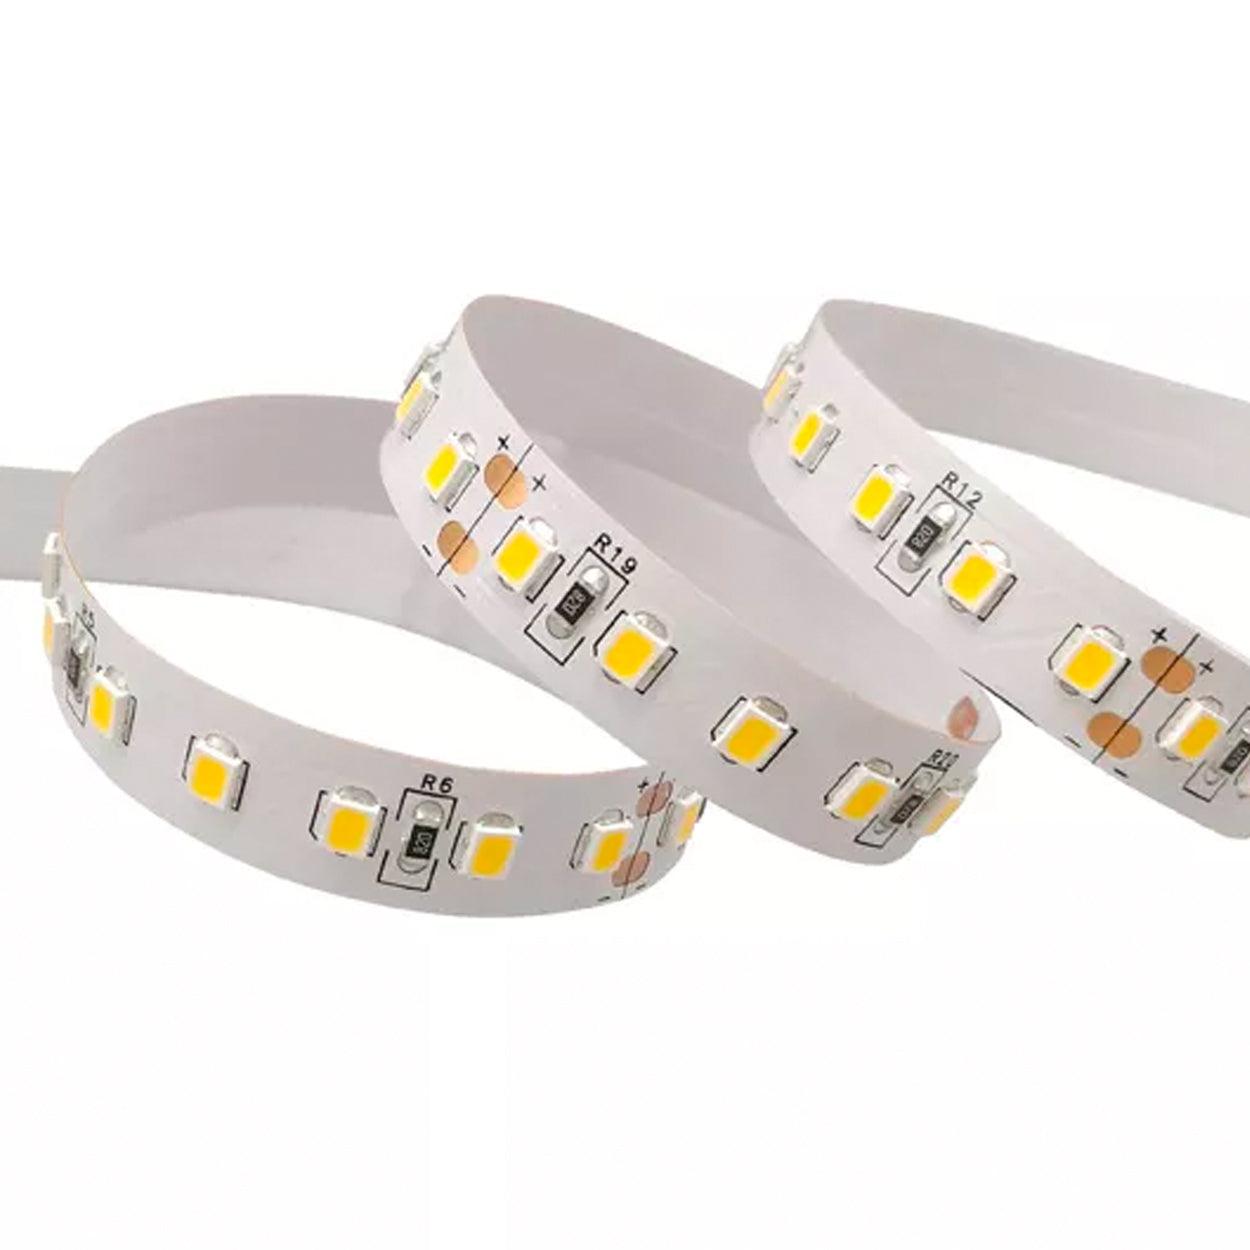 ANKUR NEON SILICON OUTDOOR IP65 RATED LED STRIP LIGHT (5 Meter Roll) at the  lowest price in India.